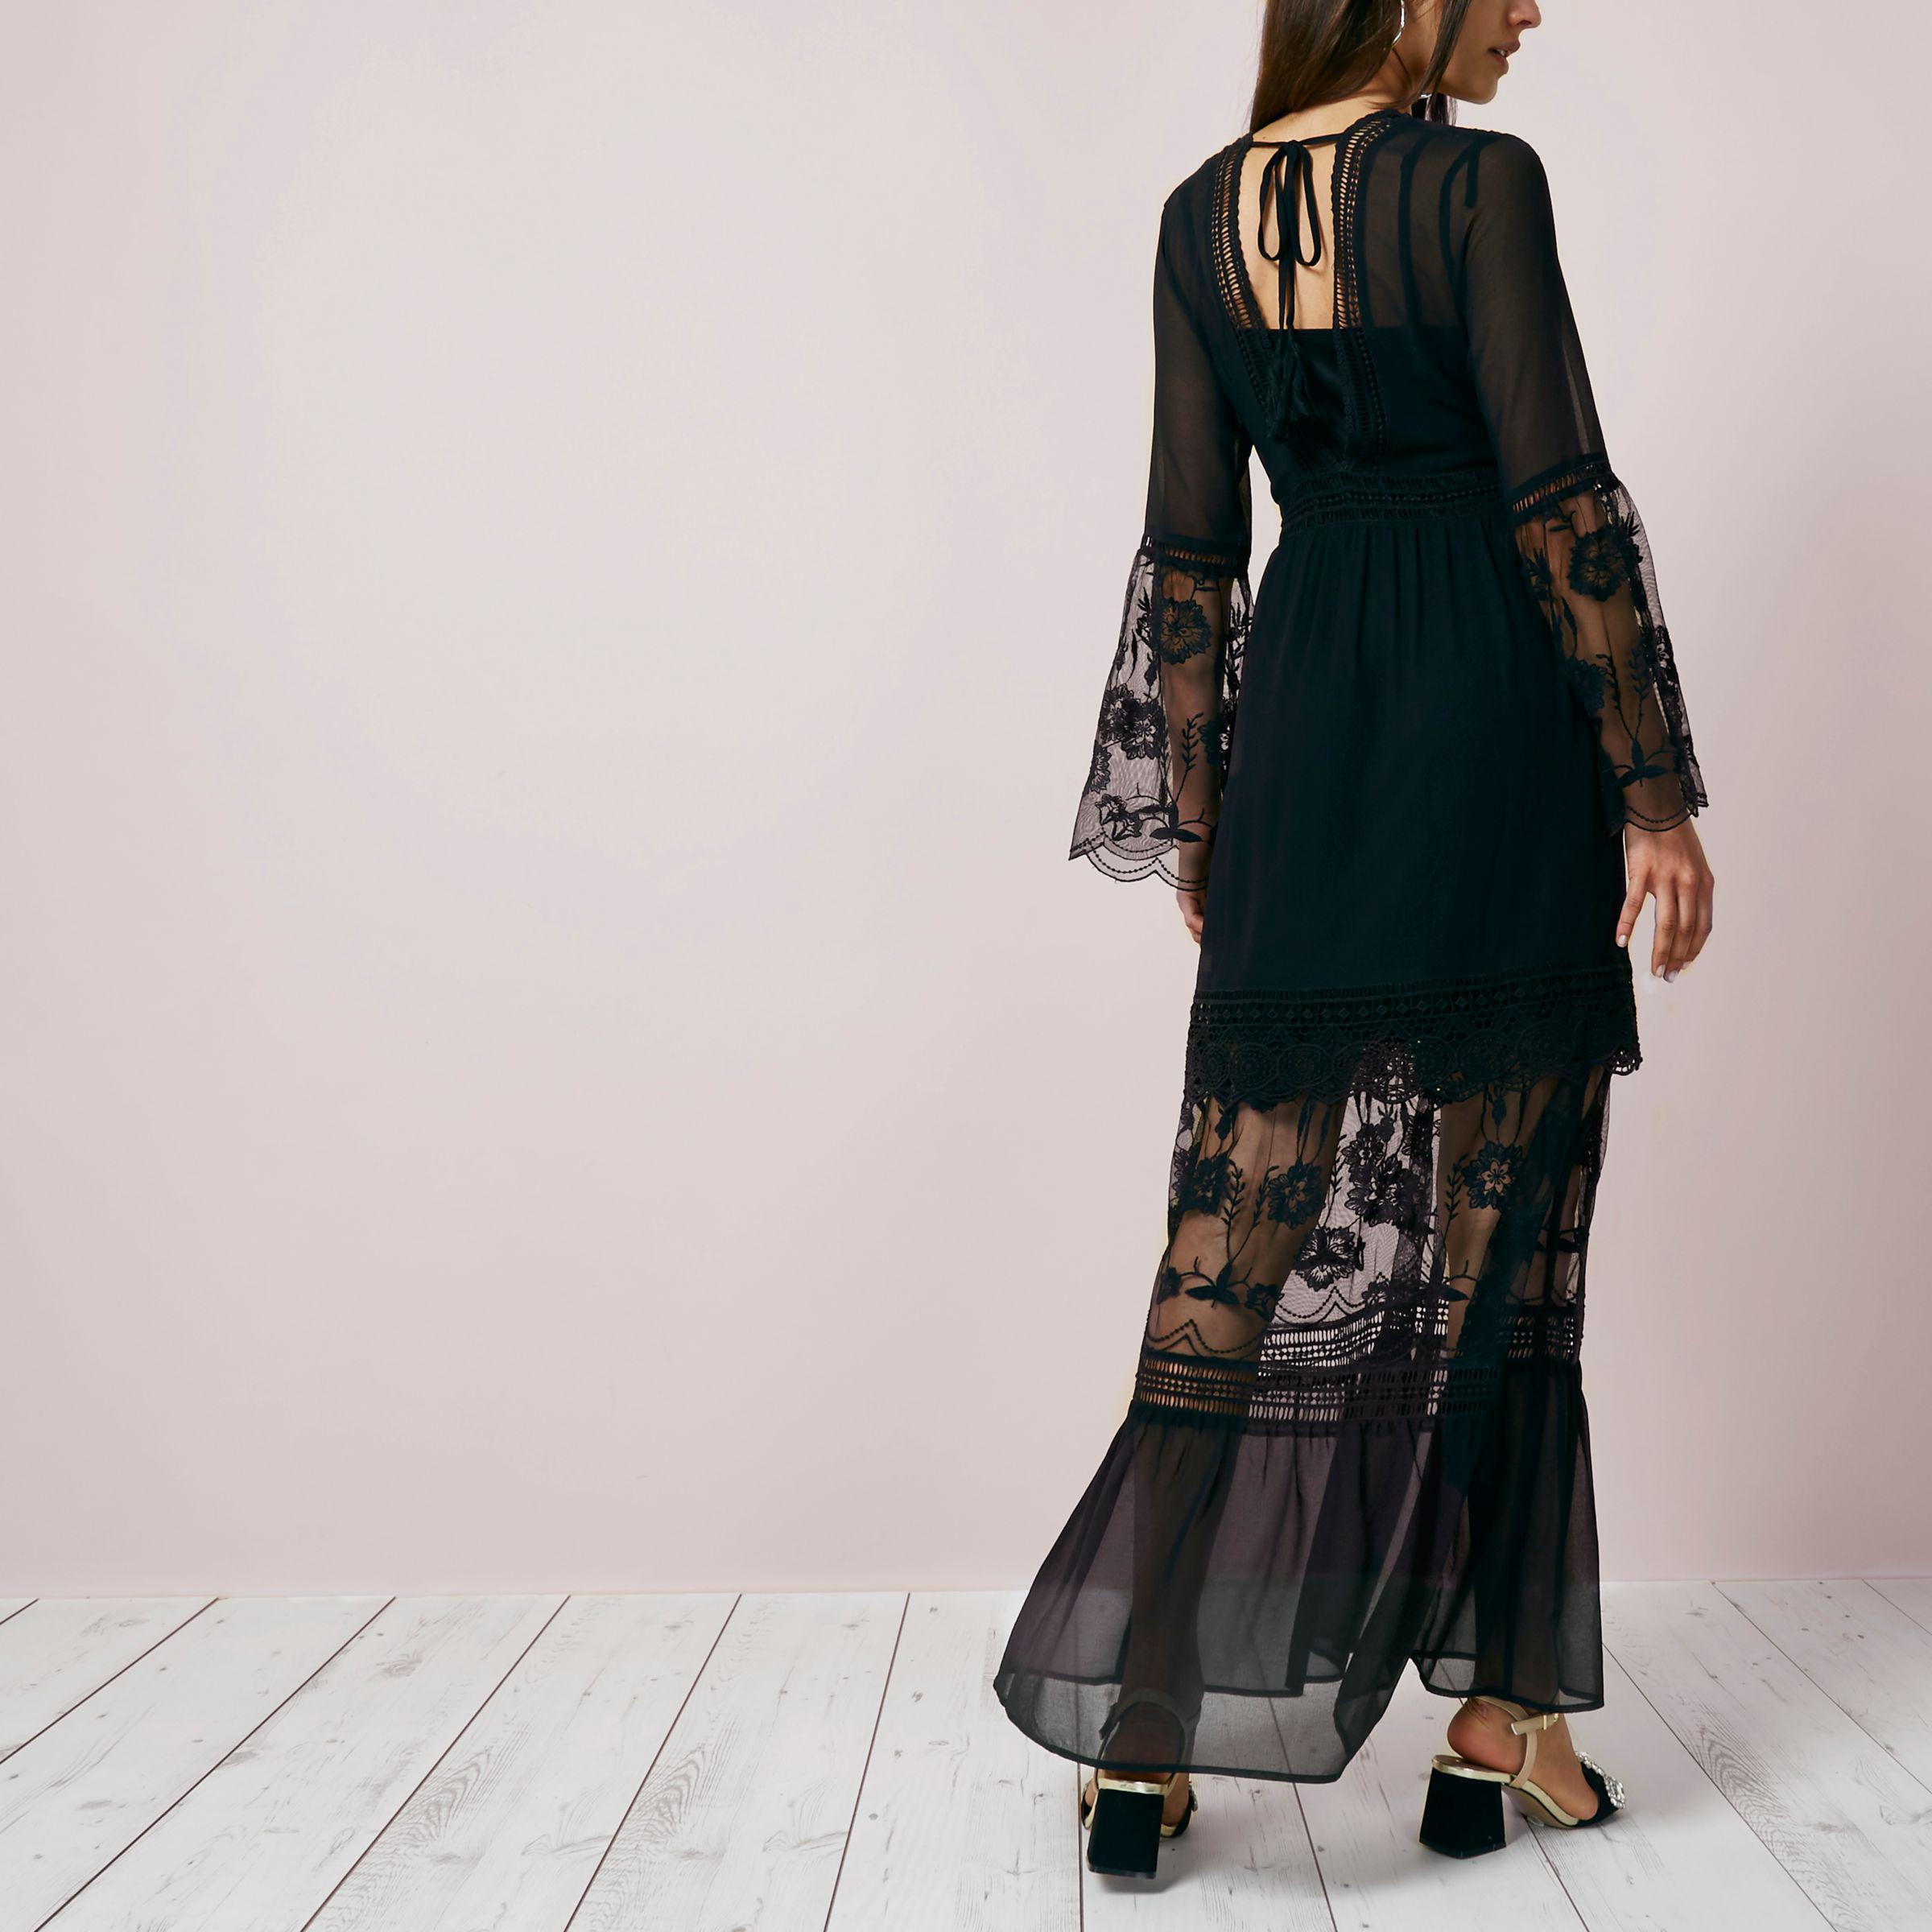 River Island Lace Bell Sleeve Maxi Dress in Black | Lyst